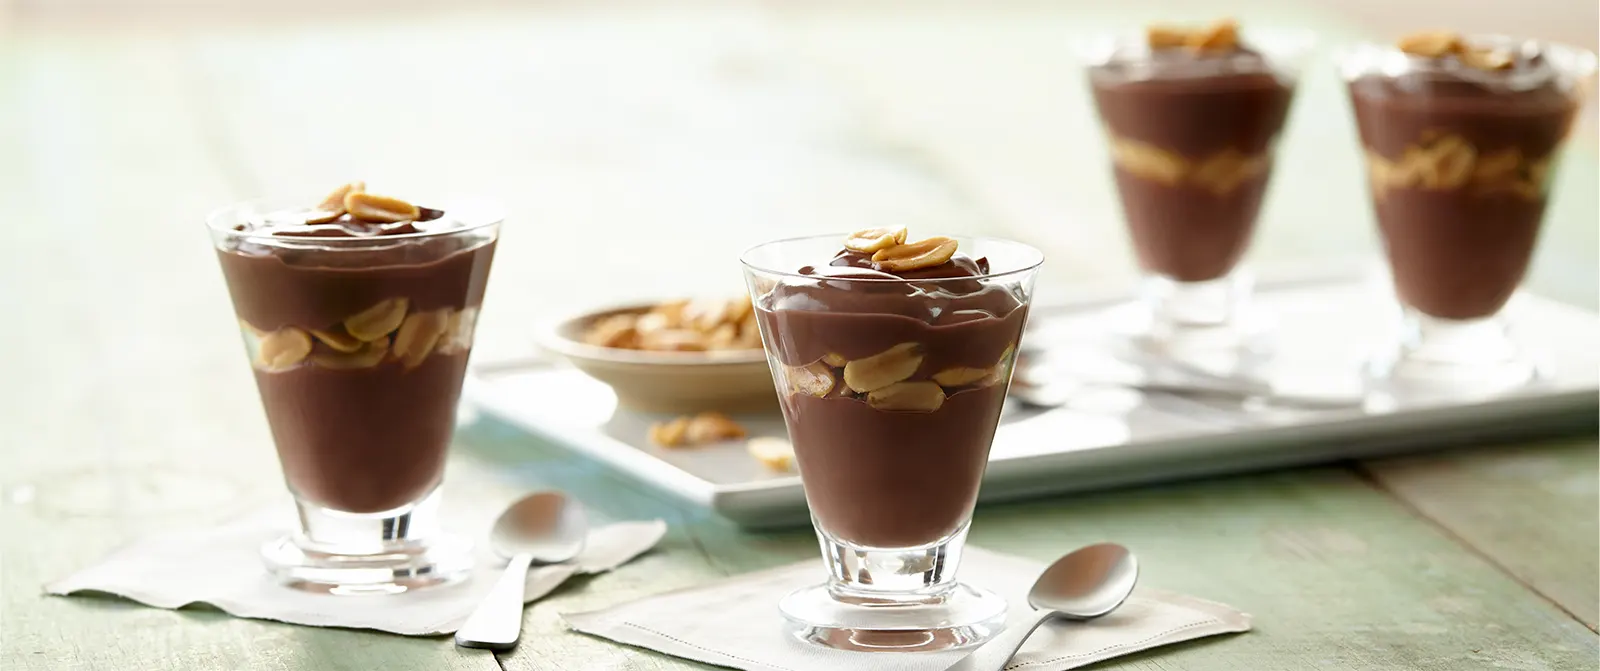 Kozy Shack® Simply Well® Chocolate Pudding